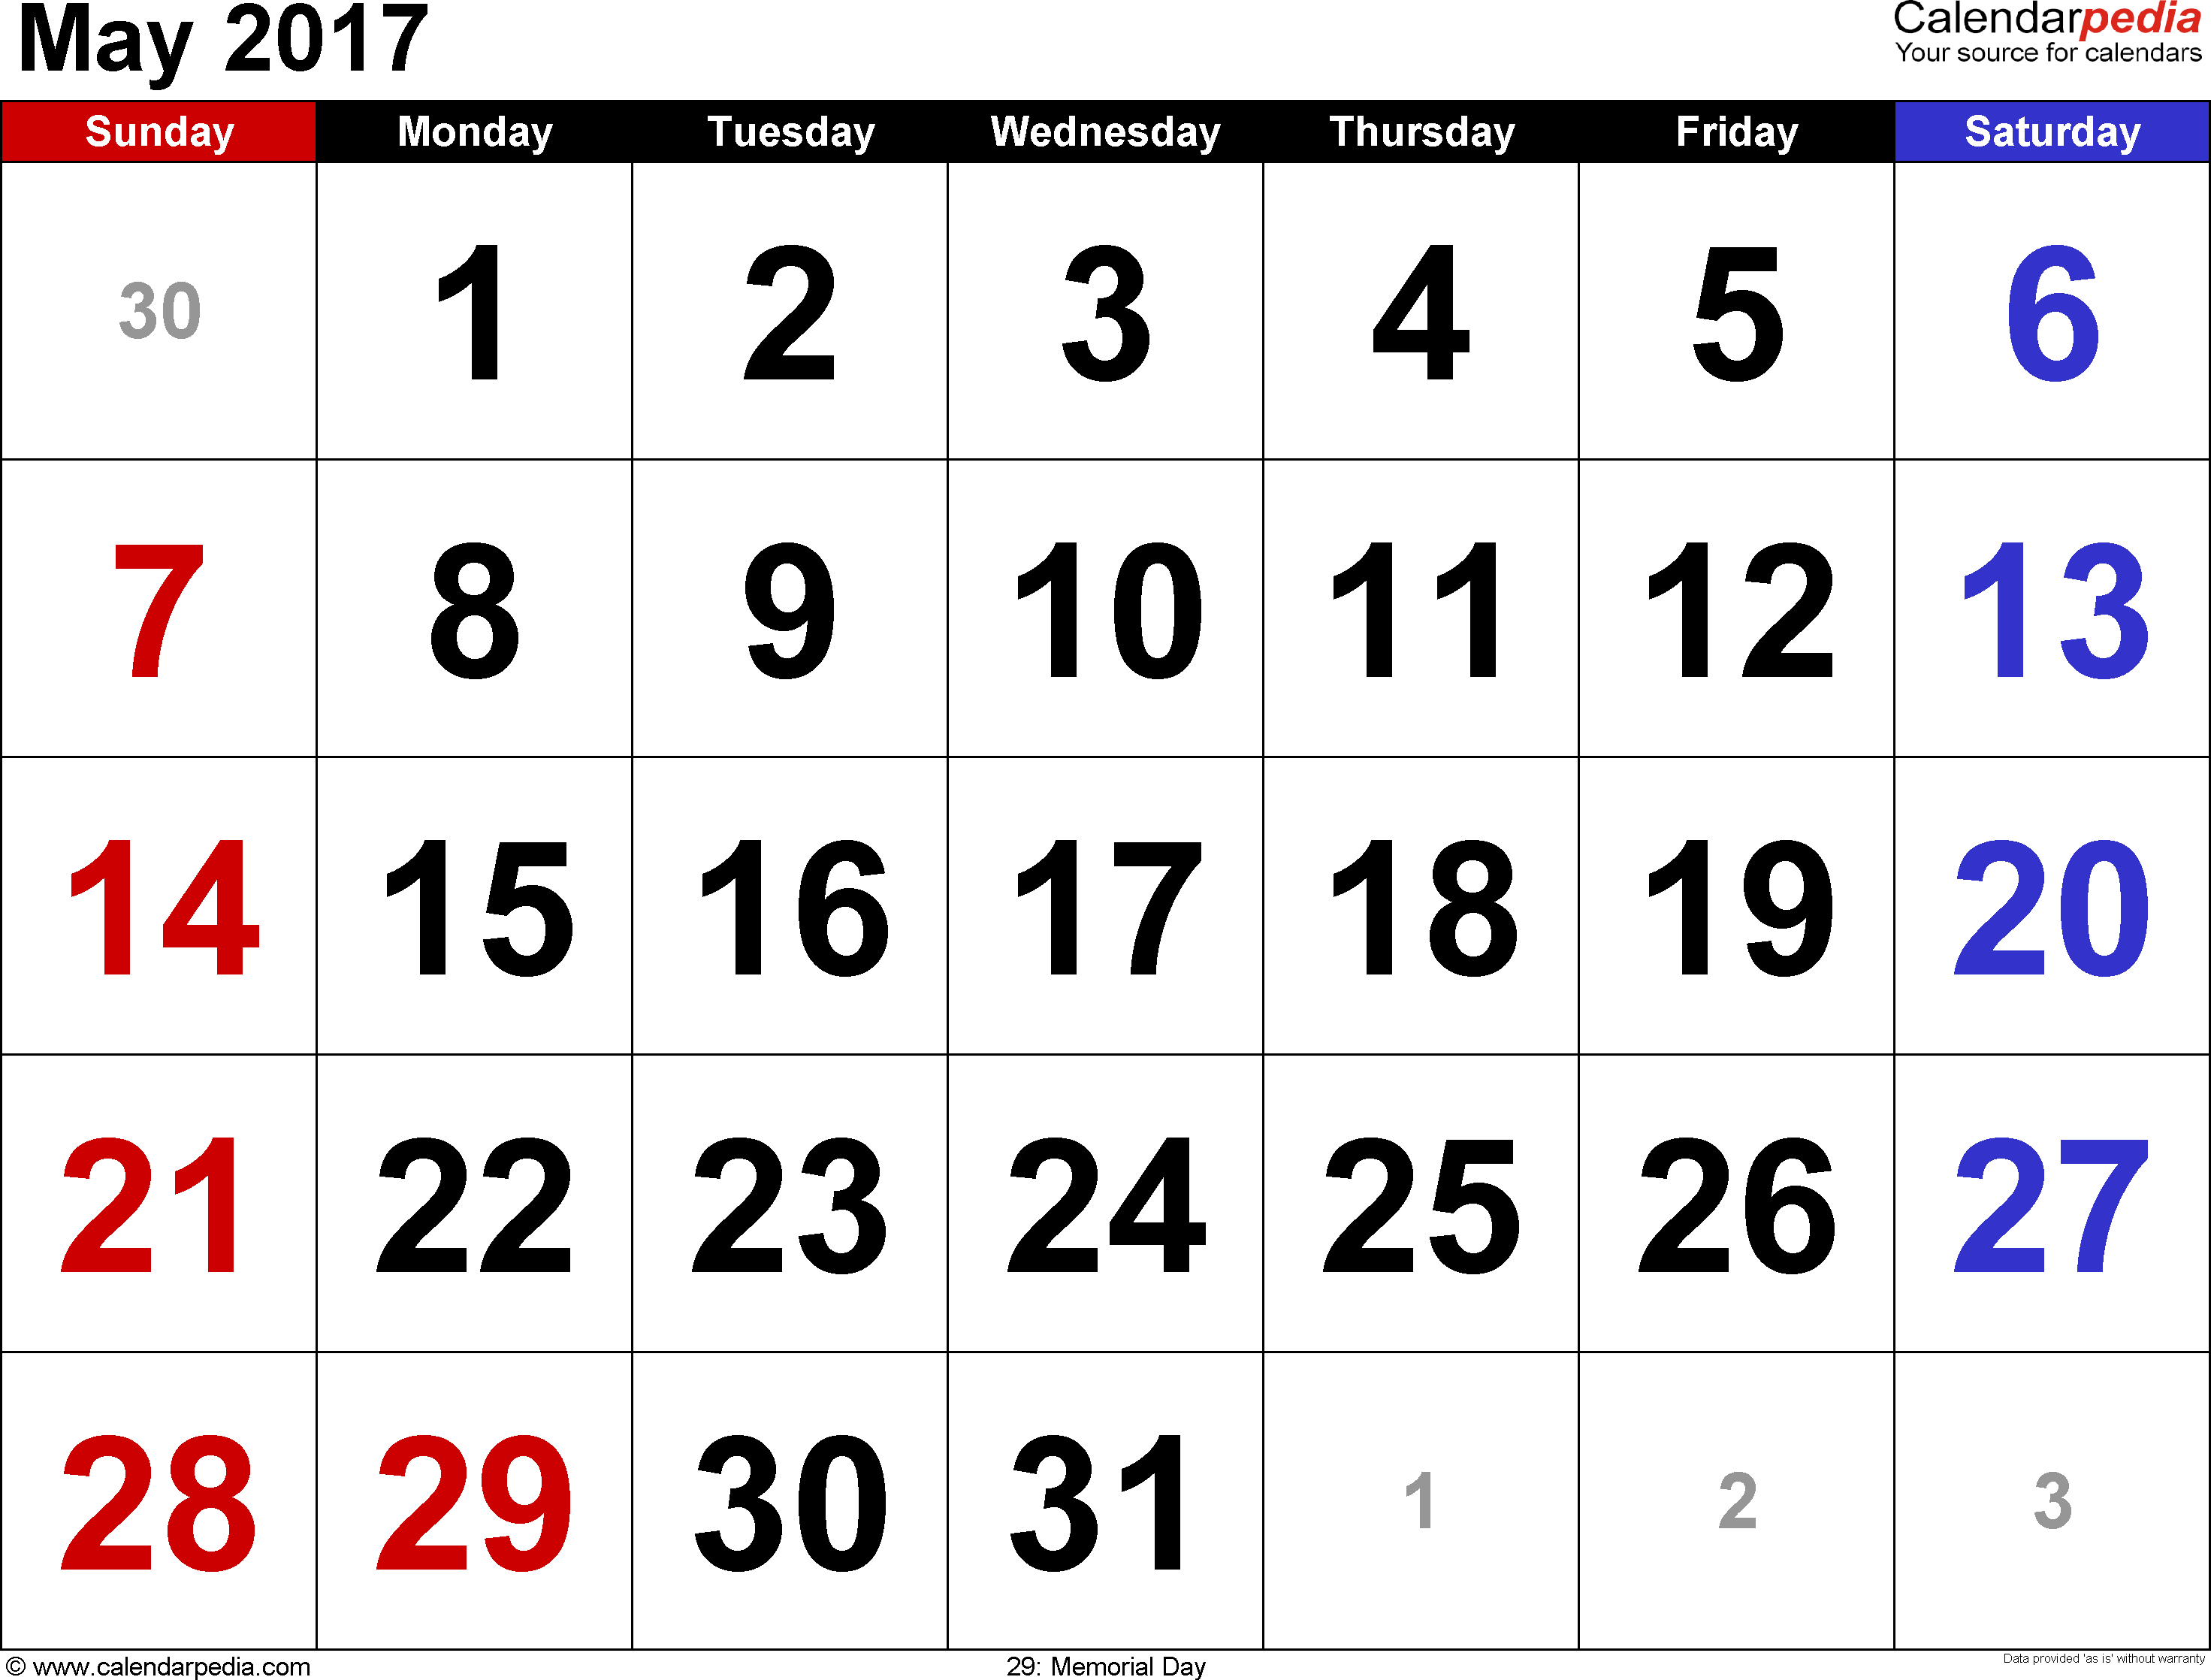 May 2017 Calendars for Word, Excel & PDF